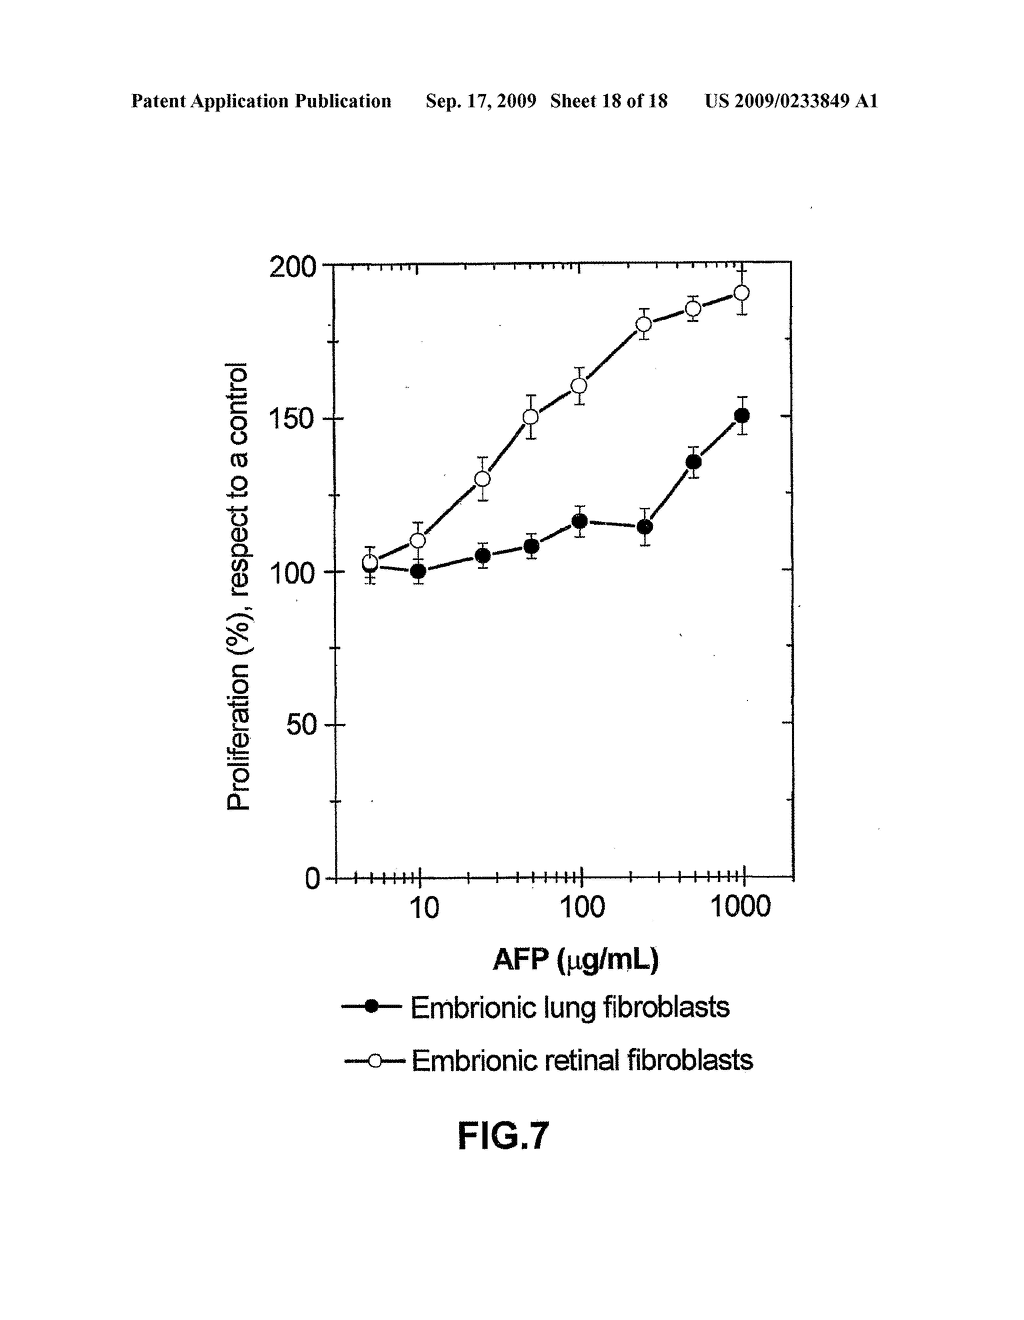 Recombinant Alpha-Fetoprotein, Method and Means for Preparation Thereof, Compositions on the Base Thereof and Use Thereof - diagram, schematic, and image 19